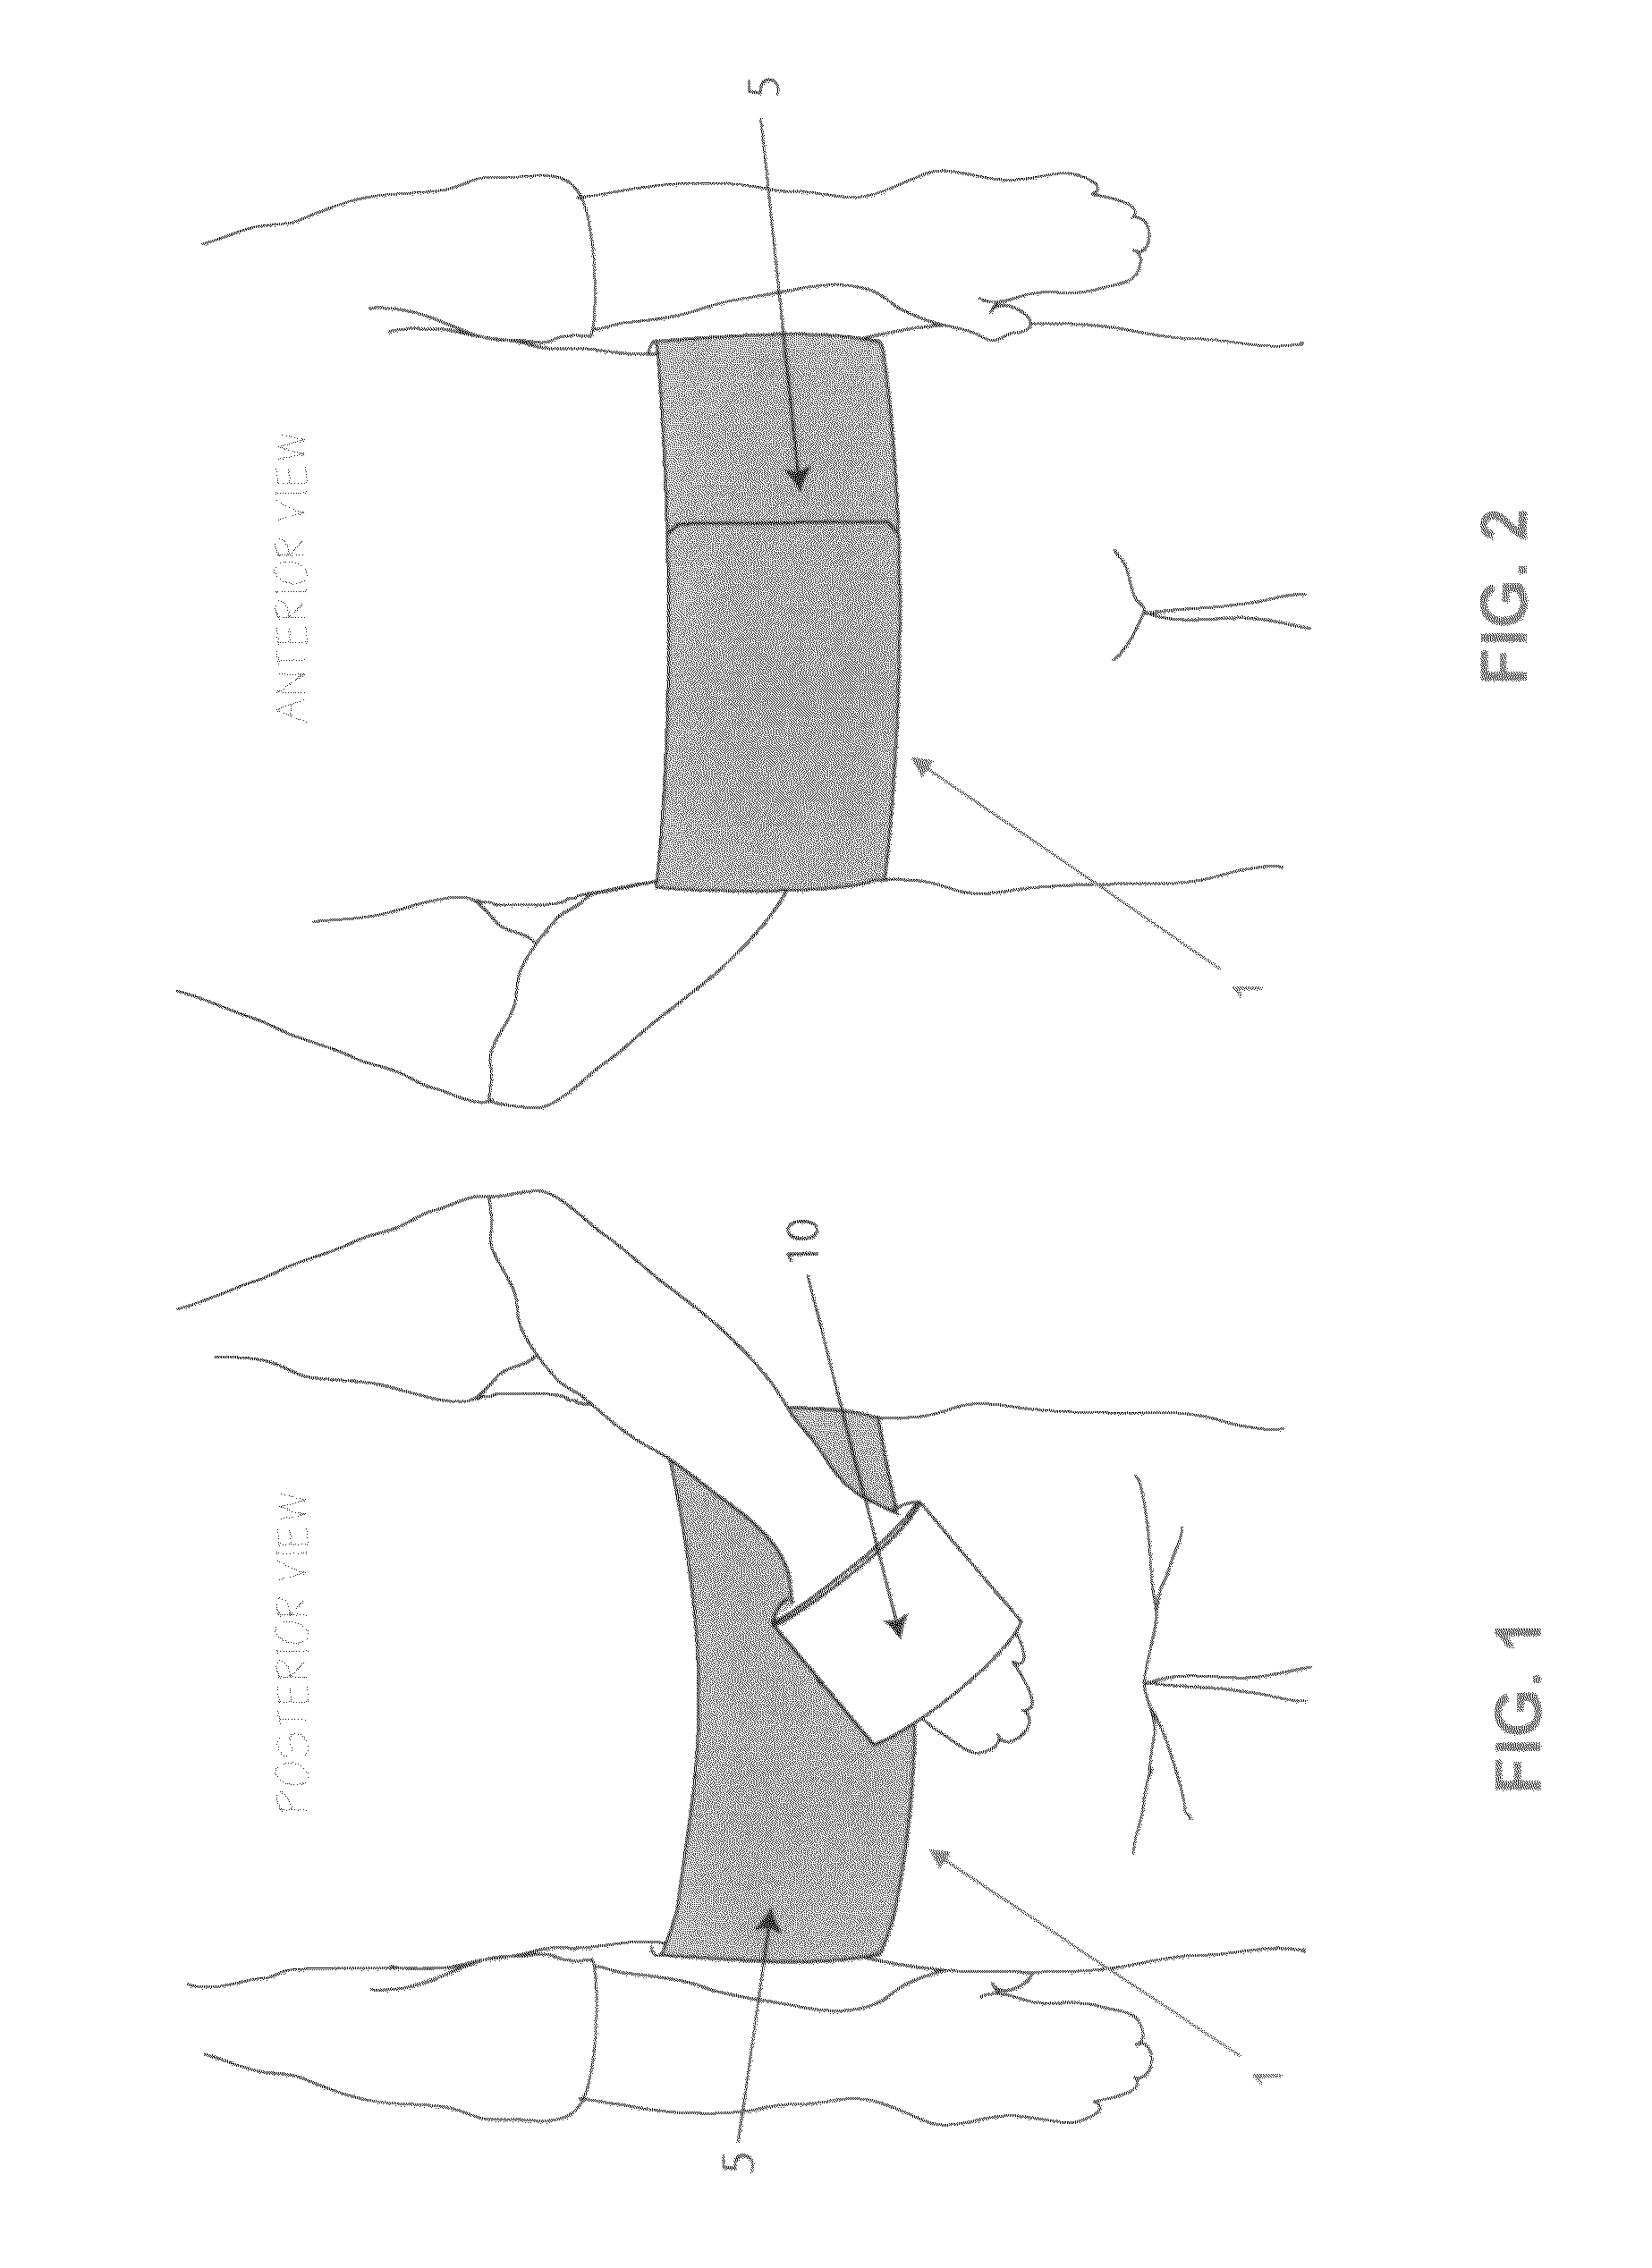 Method and apparatus for therapeutically supporting the arm of a patient